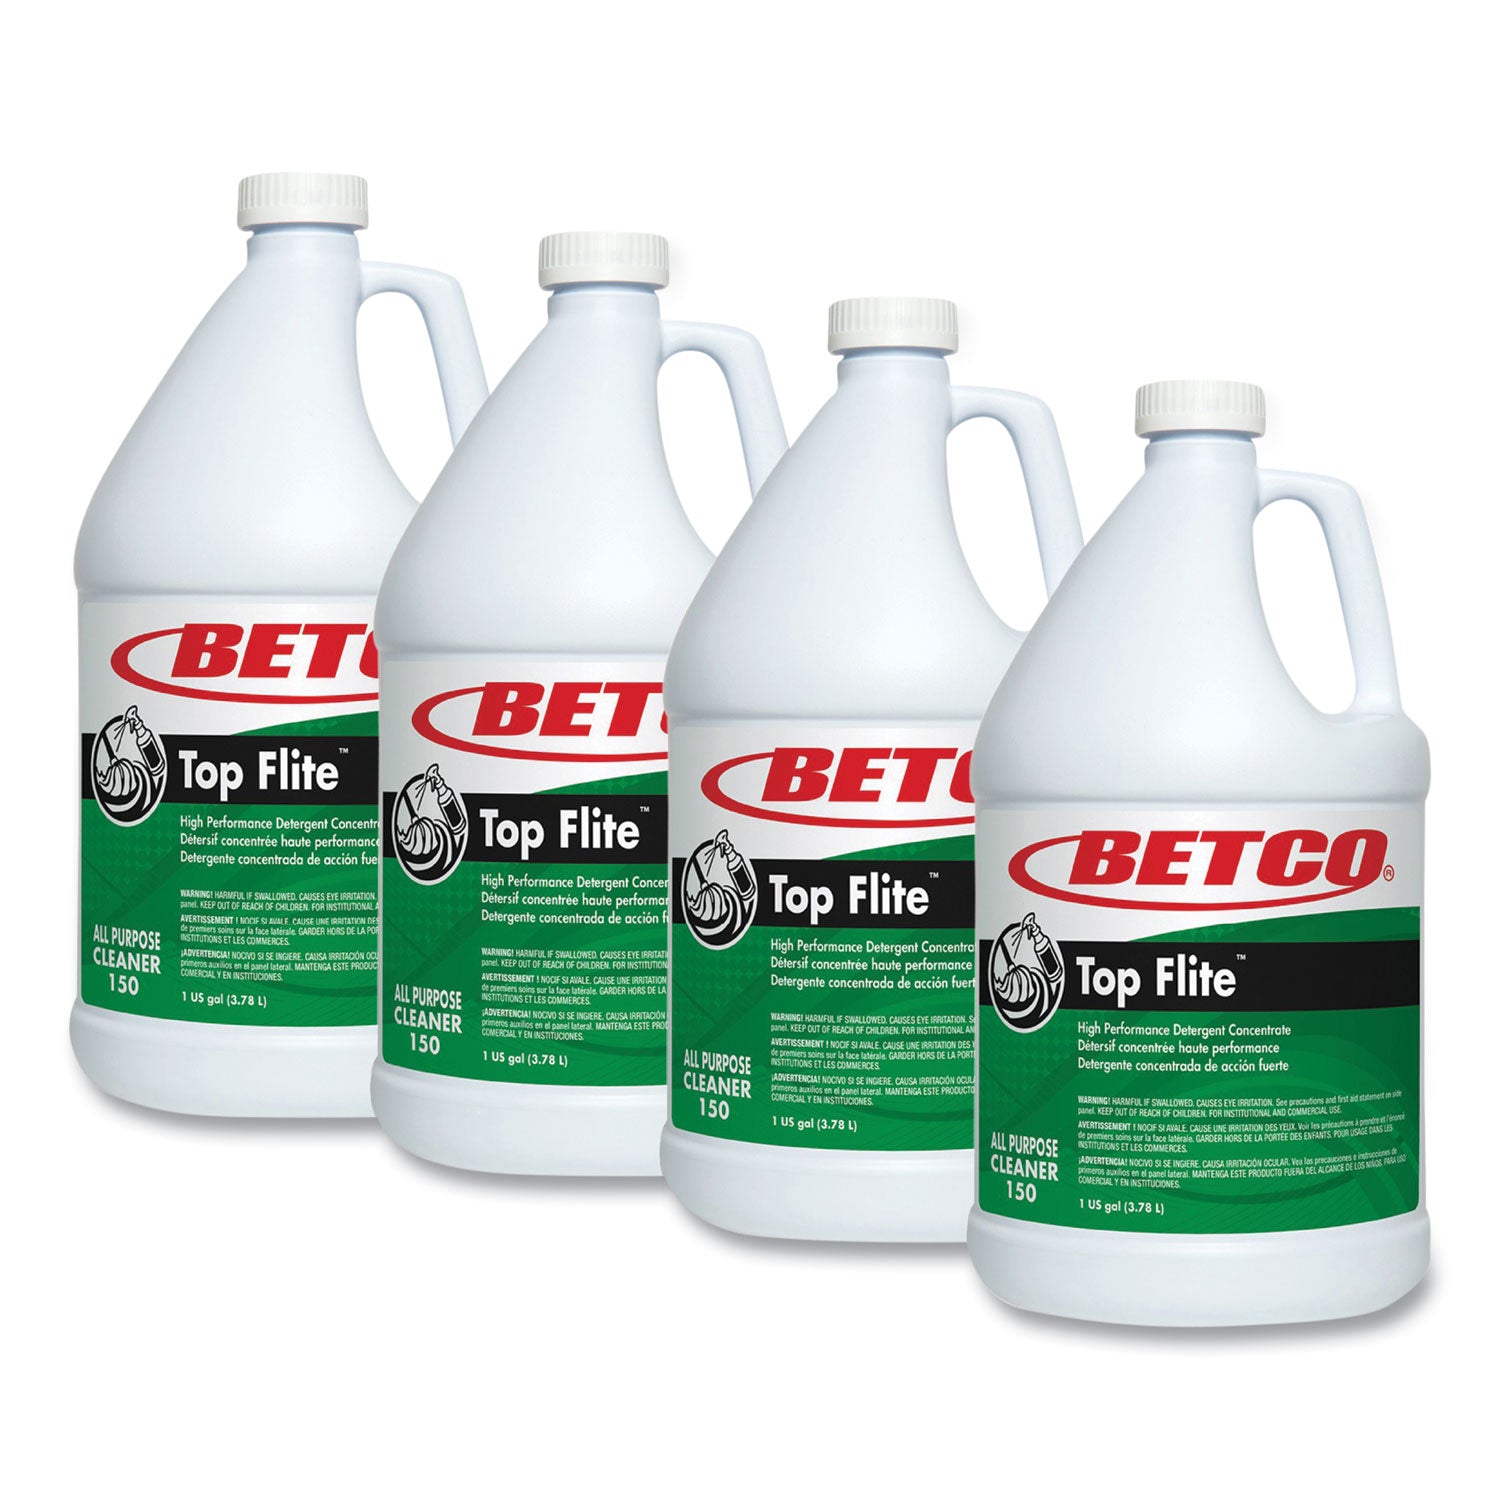 top-flite-all-purpose-cleaner-mint-scent-1-gal-bottle-4-carton_bet1500400 - 7